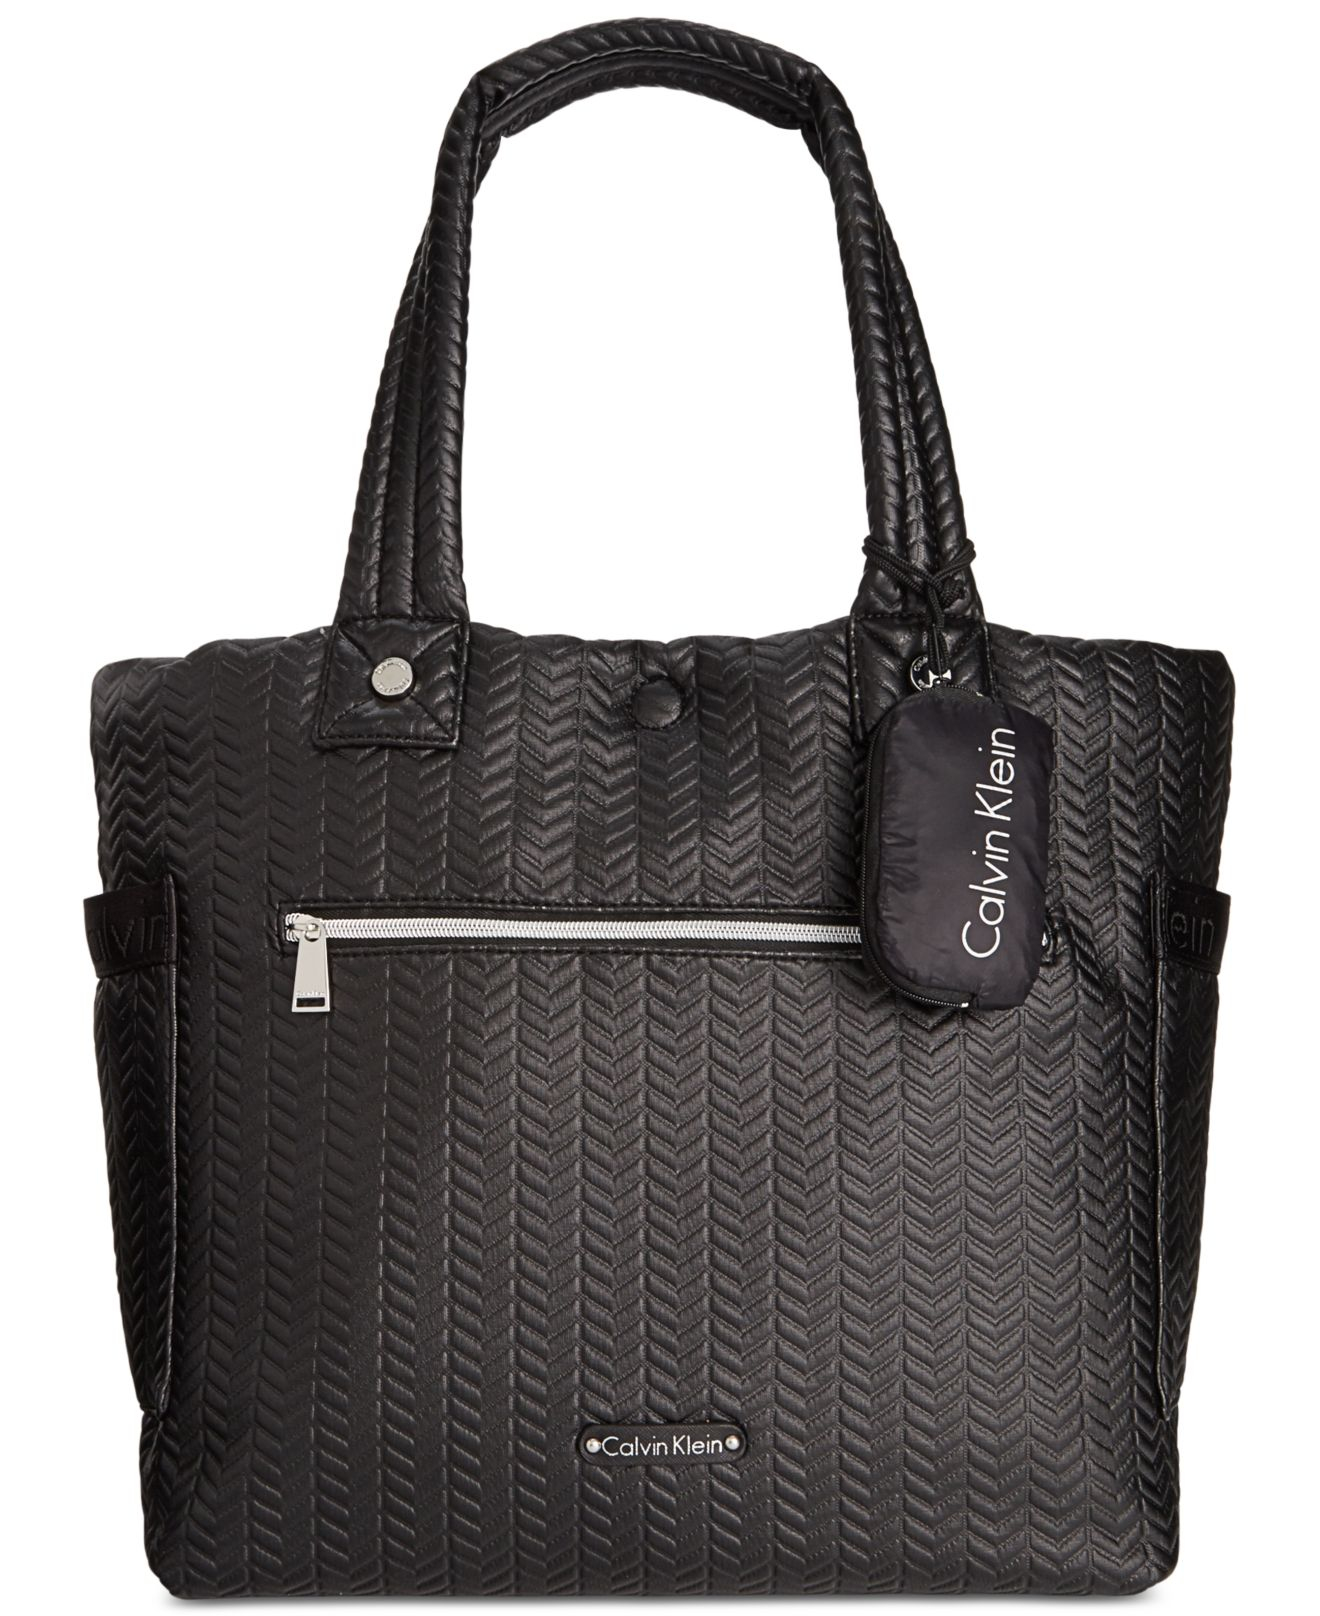 hardware voorzetsel negatief Calvin Klein Cire Reversible Extra Large Quilted Nylon Tote in Black | Lyst